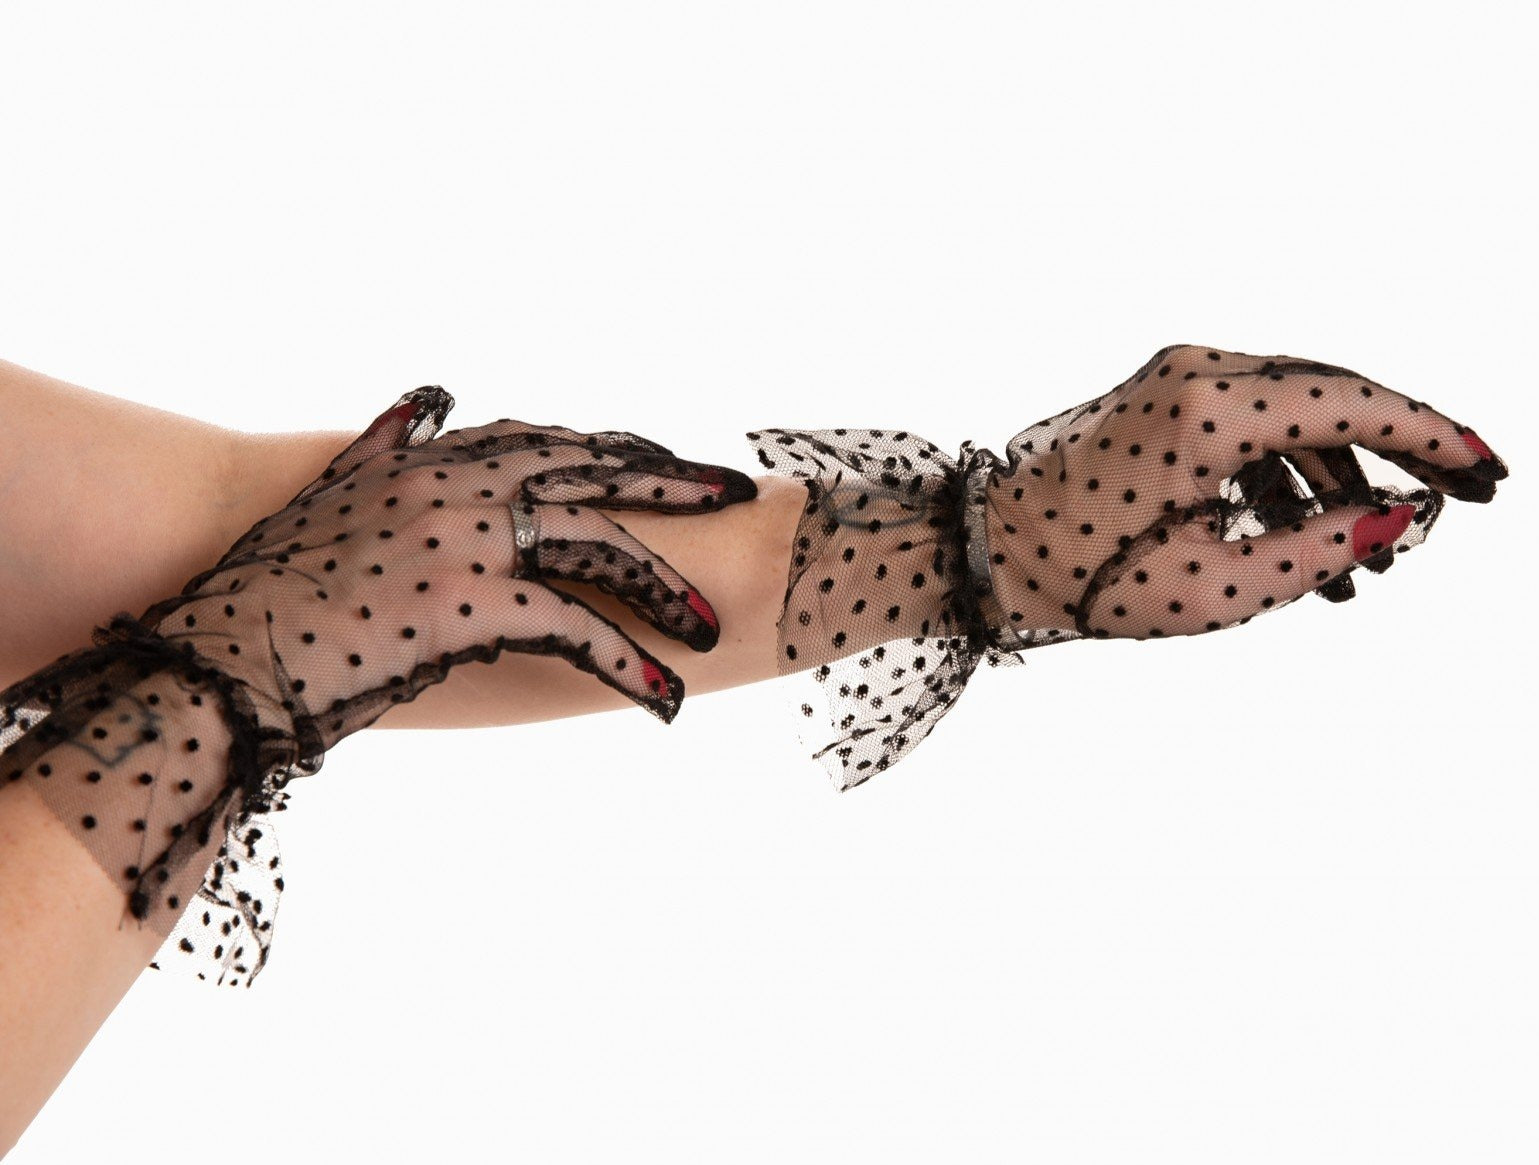 Pamela Mann Spot Mesh Gloves - Black spotted mesh tulle gloves with elastic around the wrist that creates a frill style cuff.